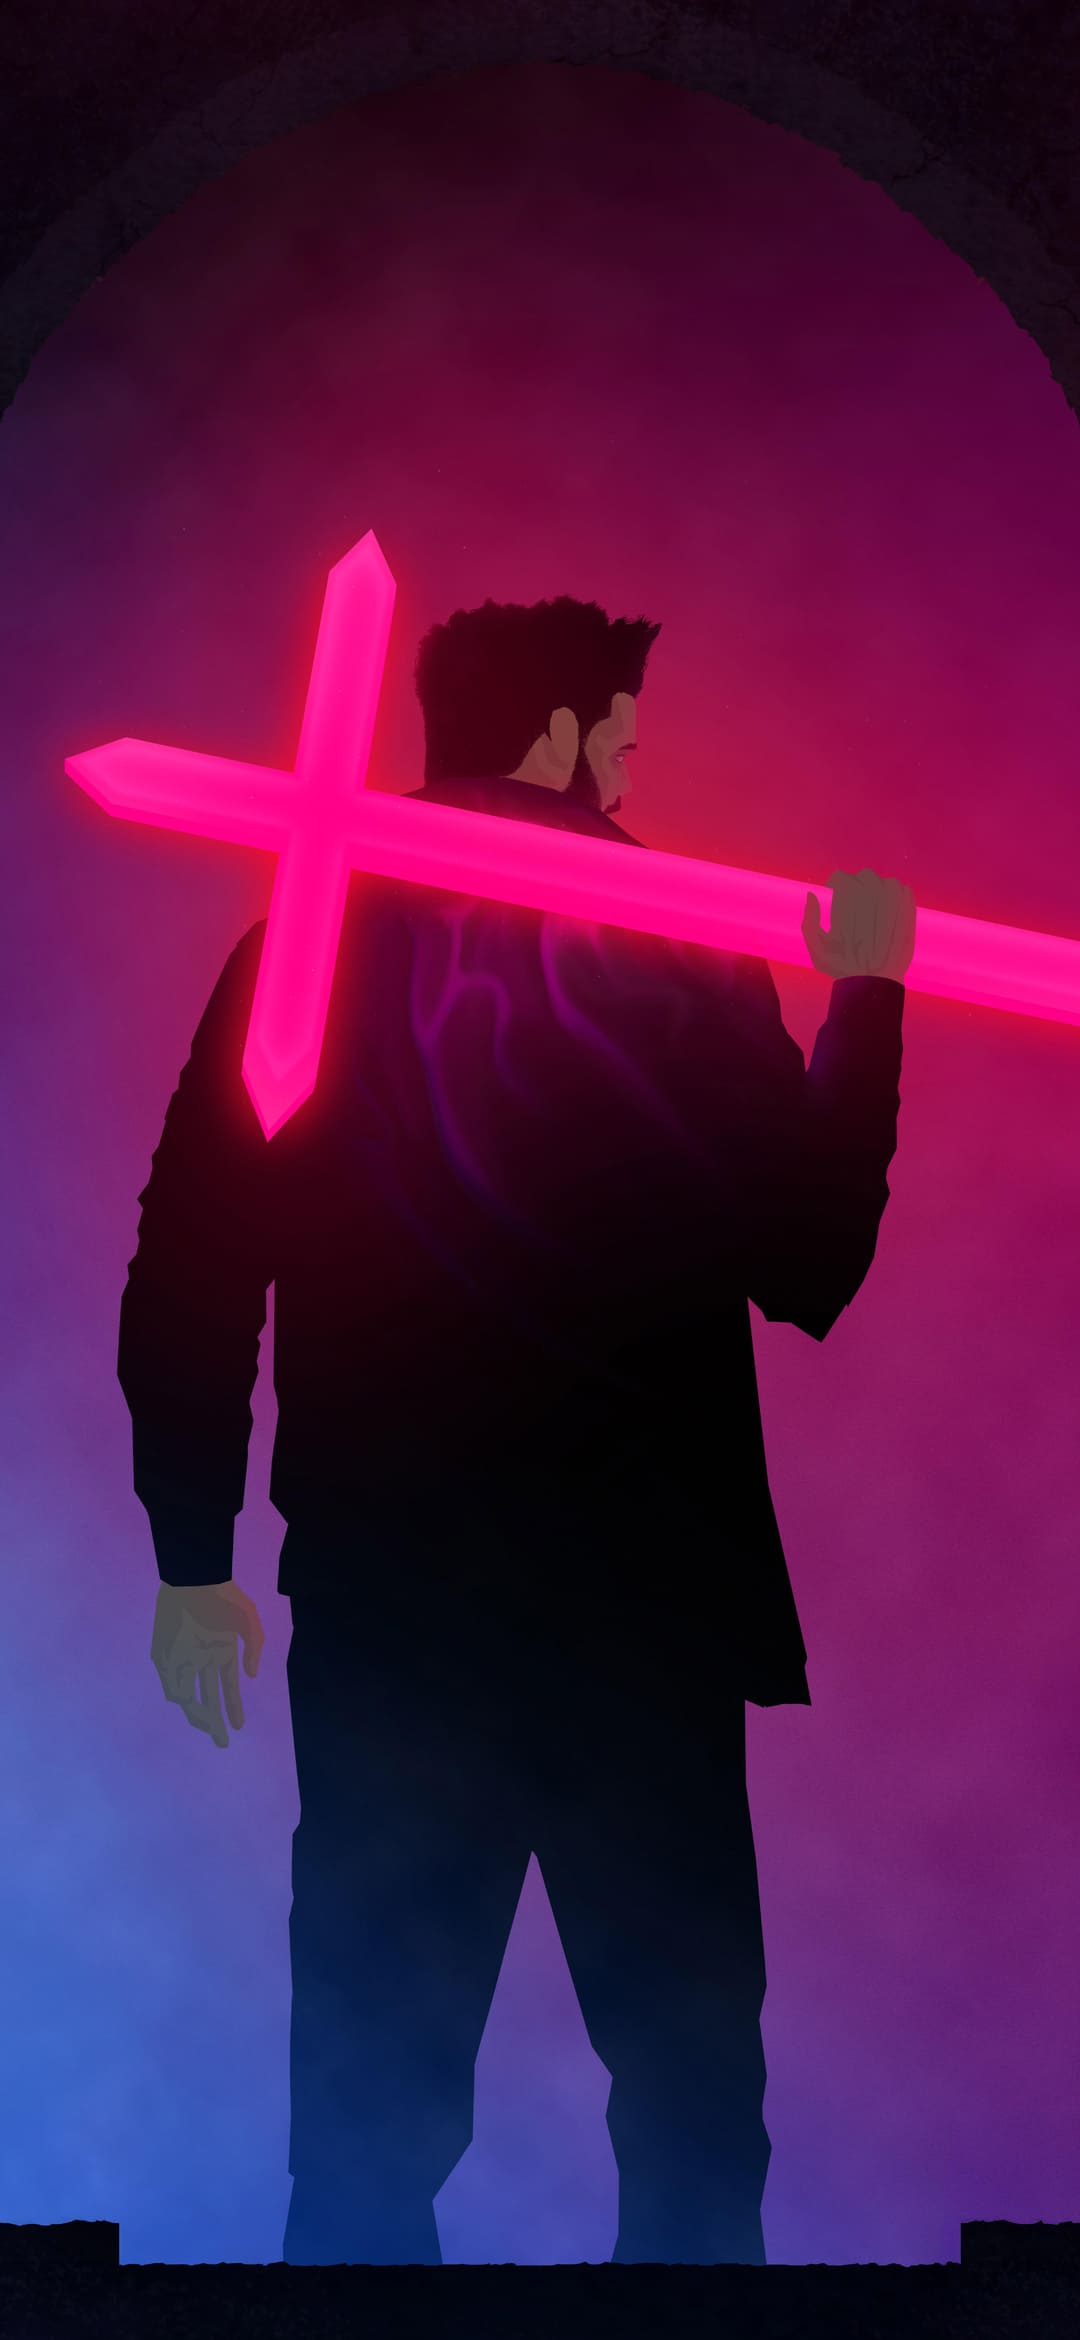 Aesthetic phone wallpaper of a man holding a pink neon sword - The Weeknd